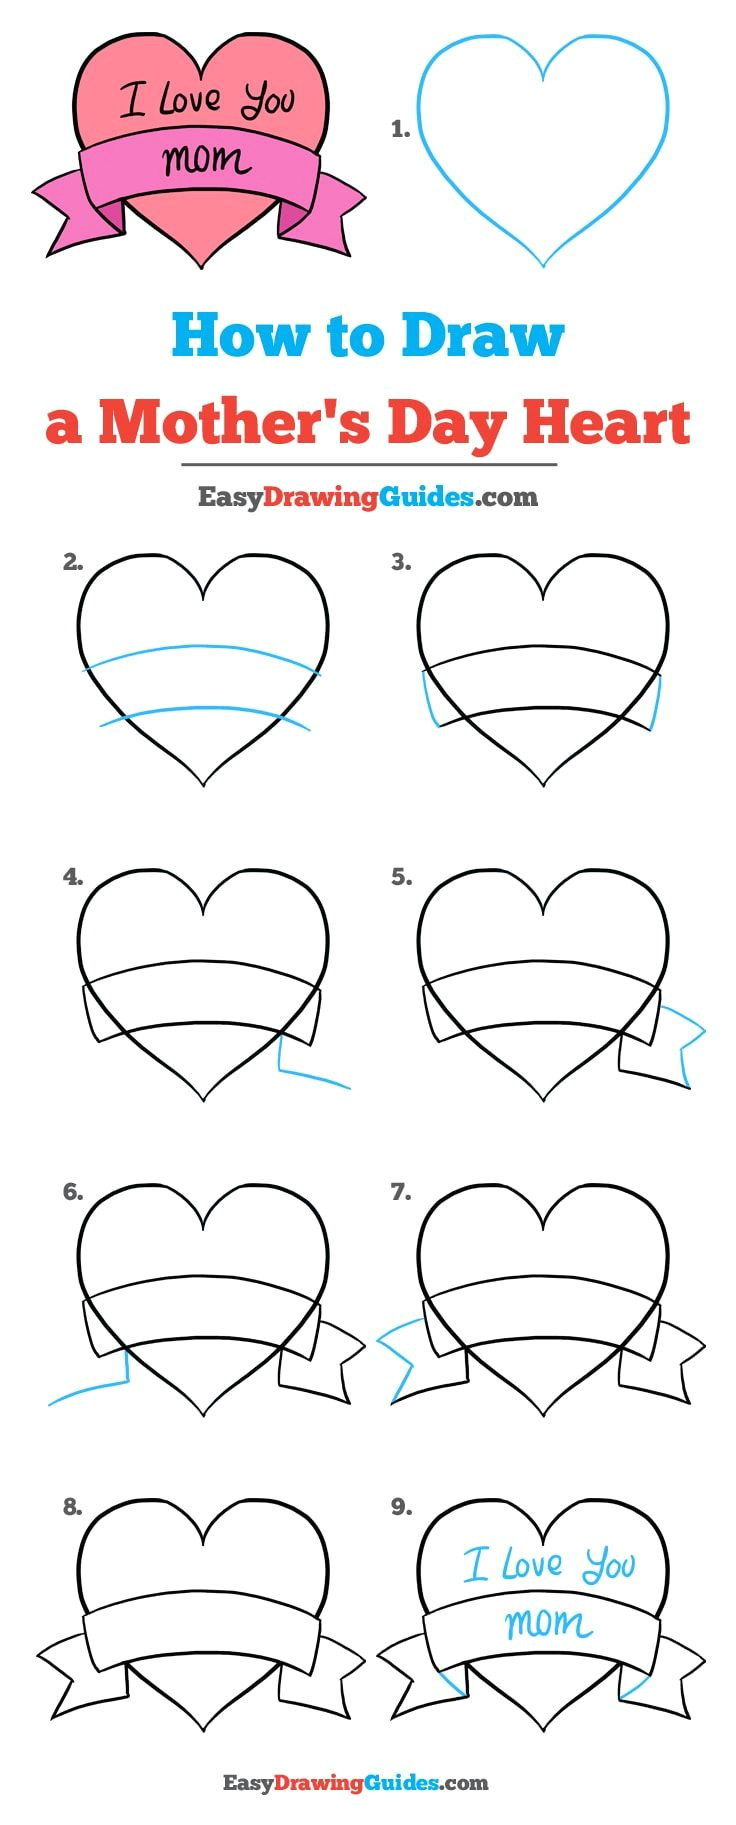 Easy Drawings by Steps How to Draw A Mother S Day Heart Really Easy Drawing Tutorial